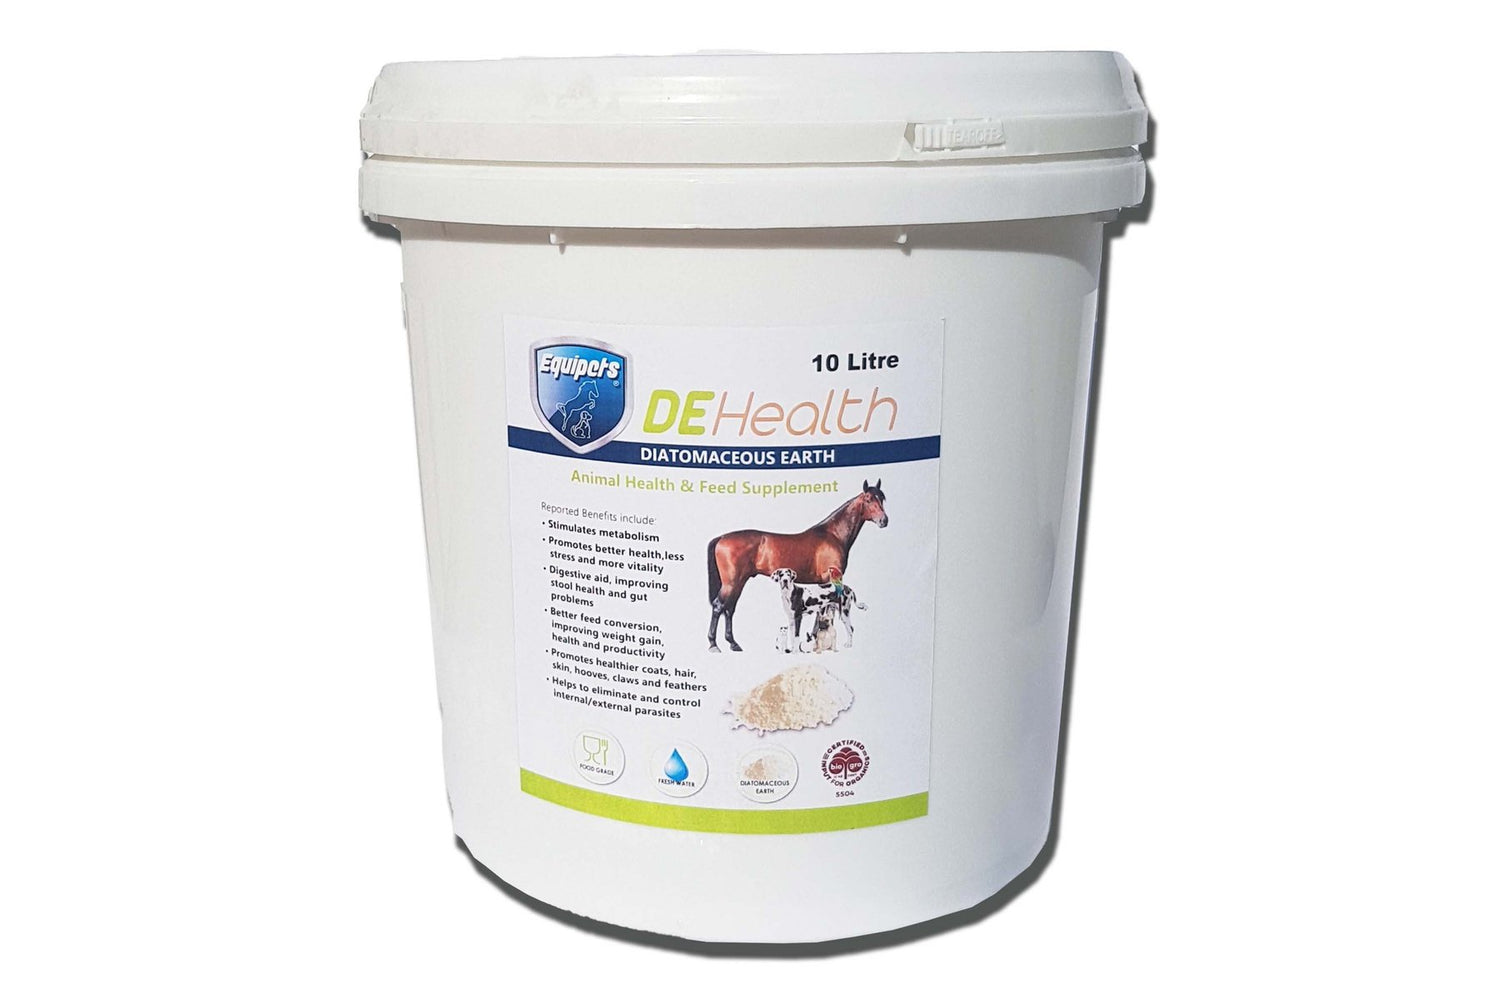 EquiPets DEHealth Diatomaceous Earth Supplement